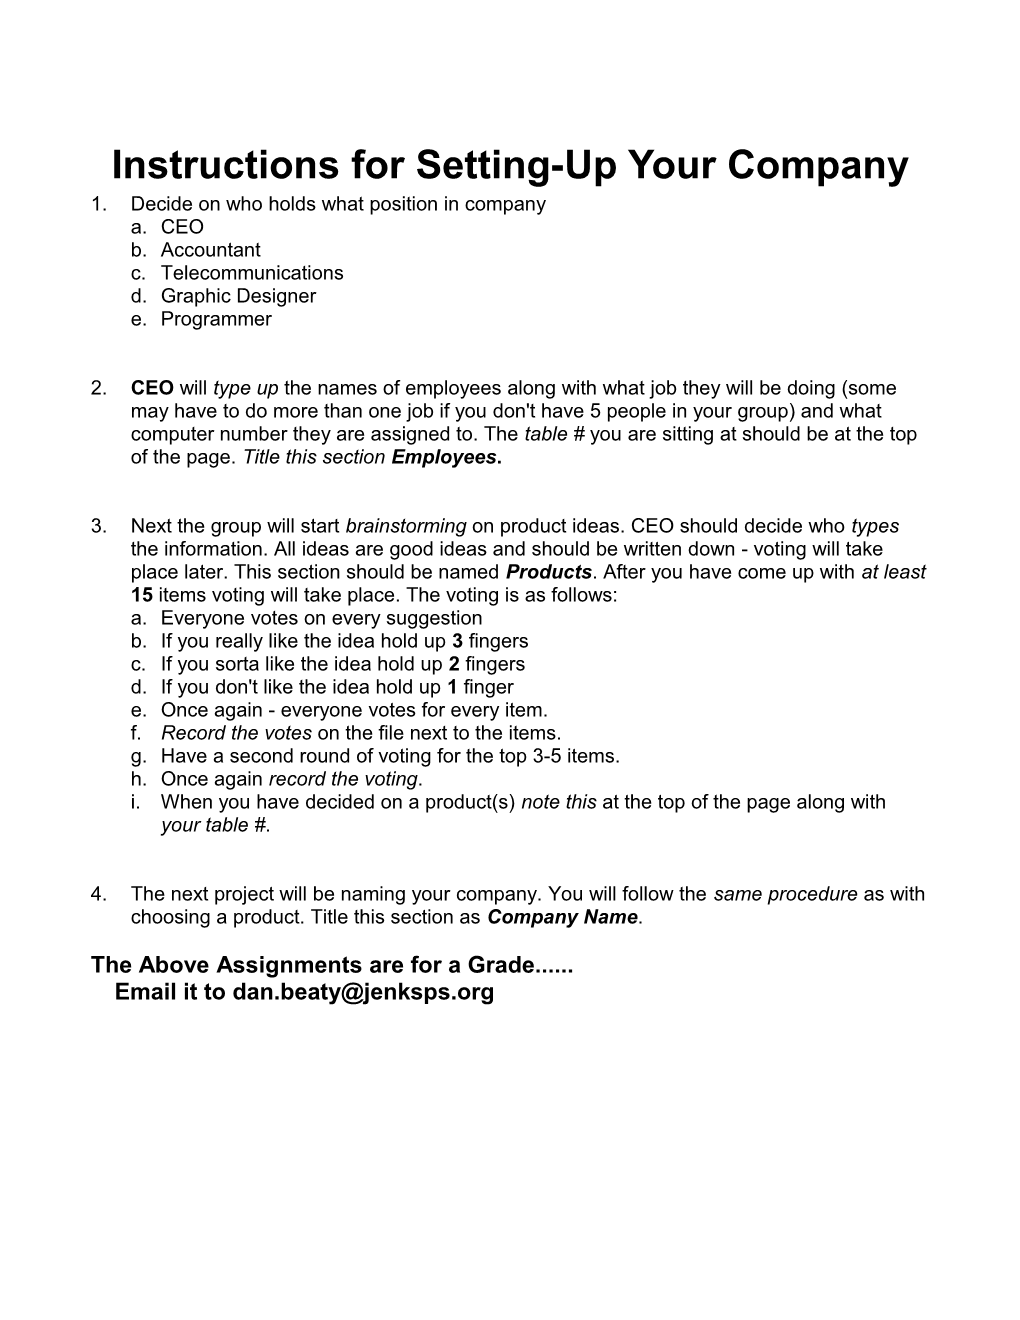 Instructions for Setting-Up Your Company